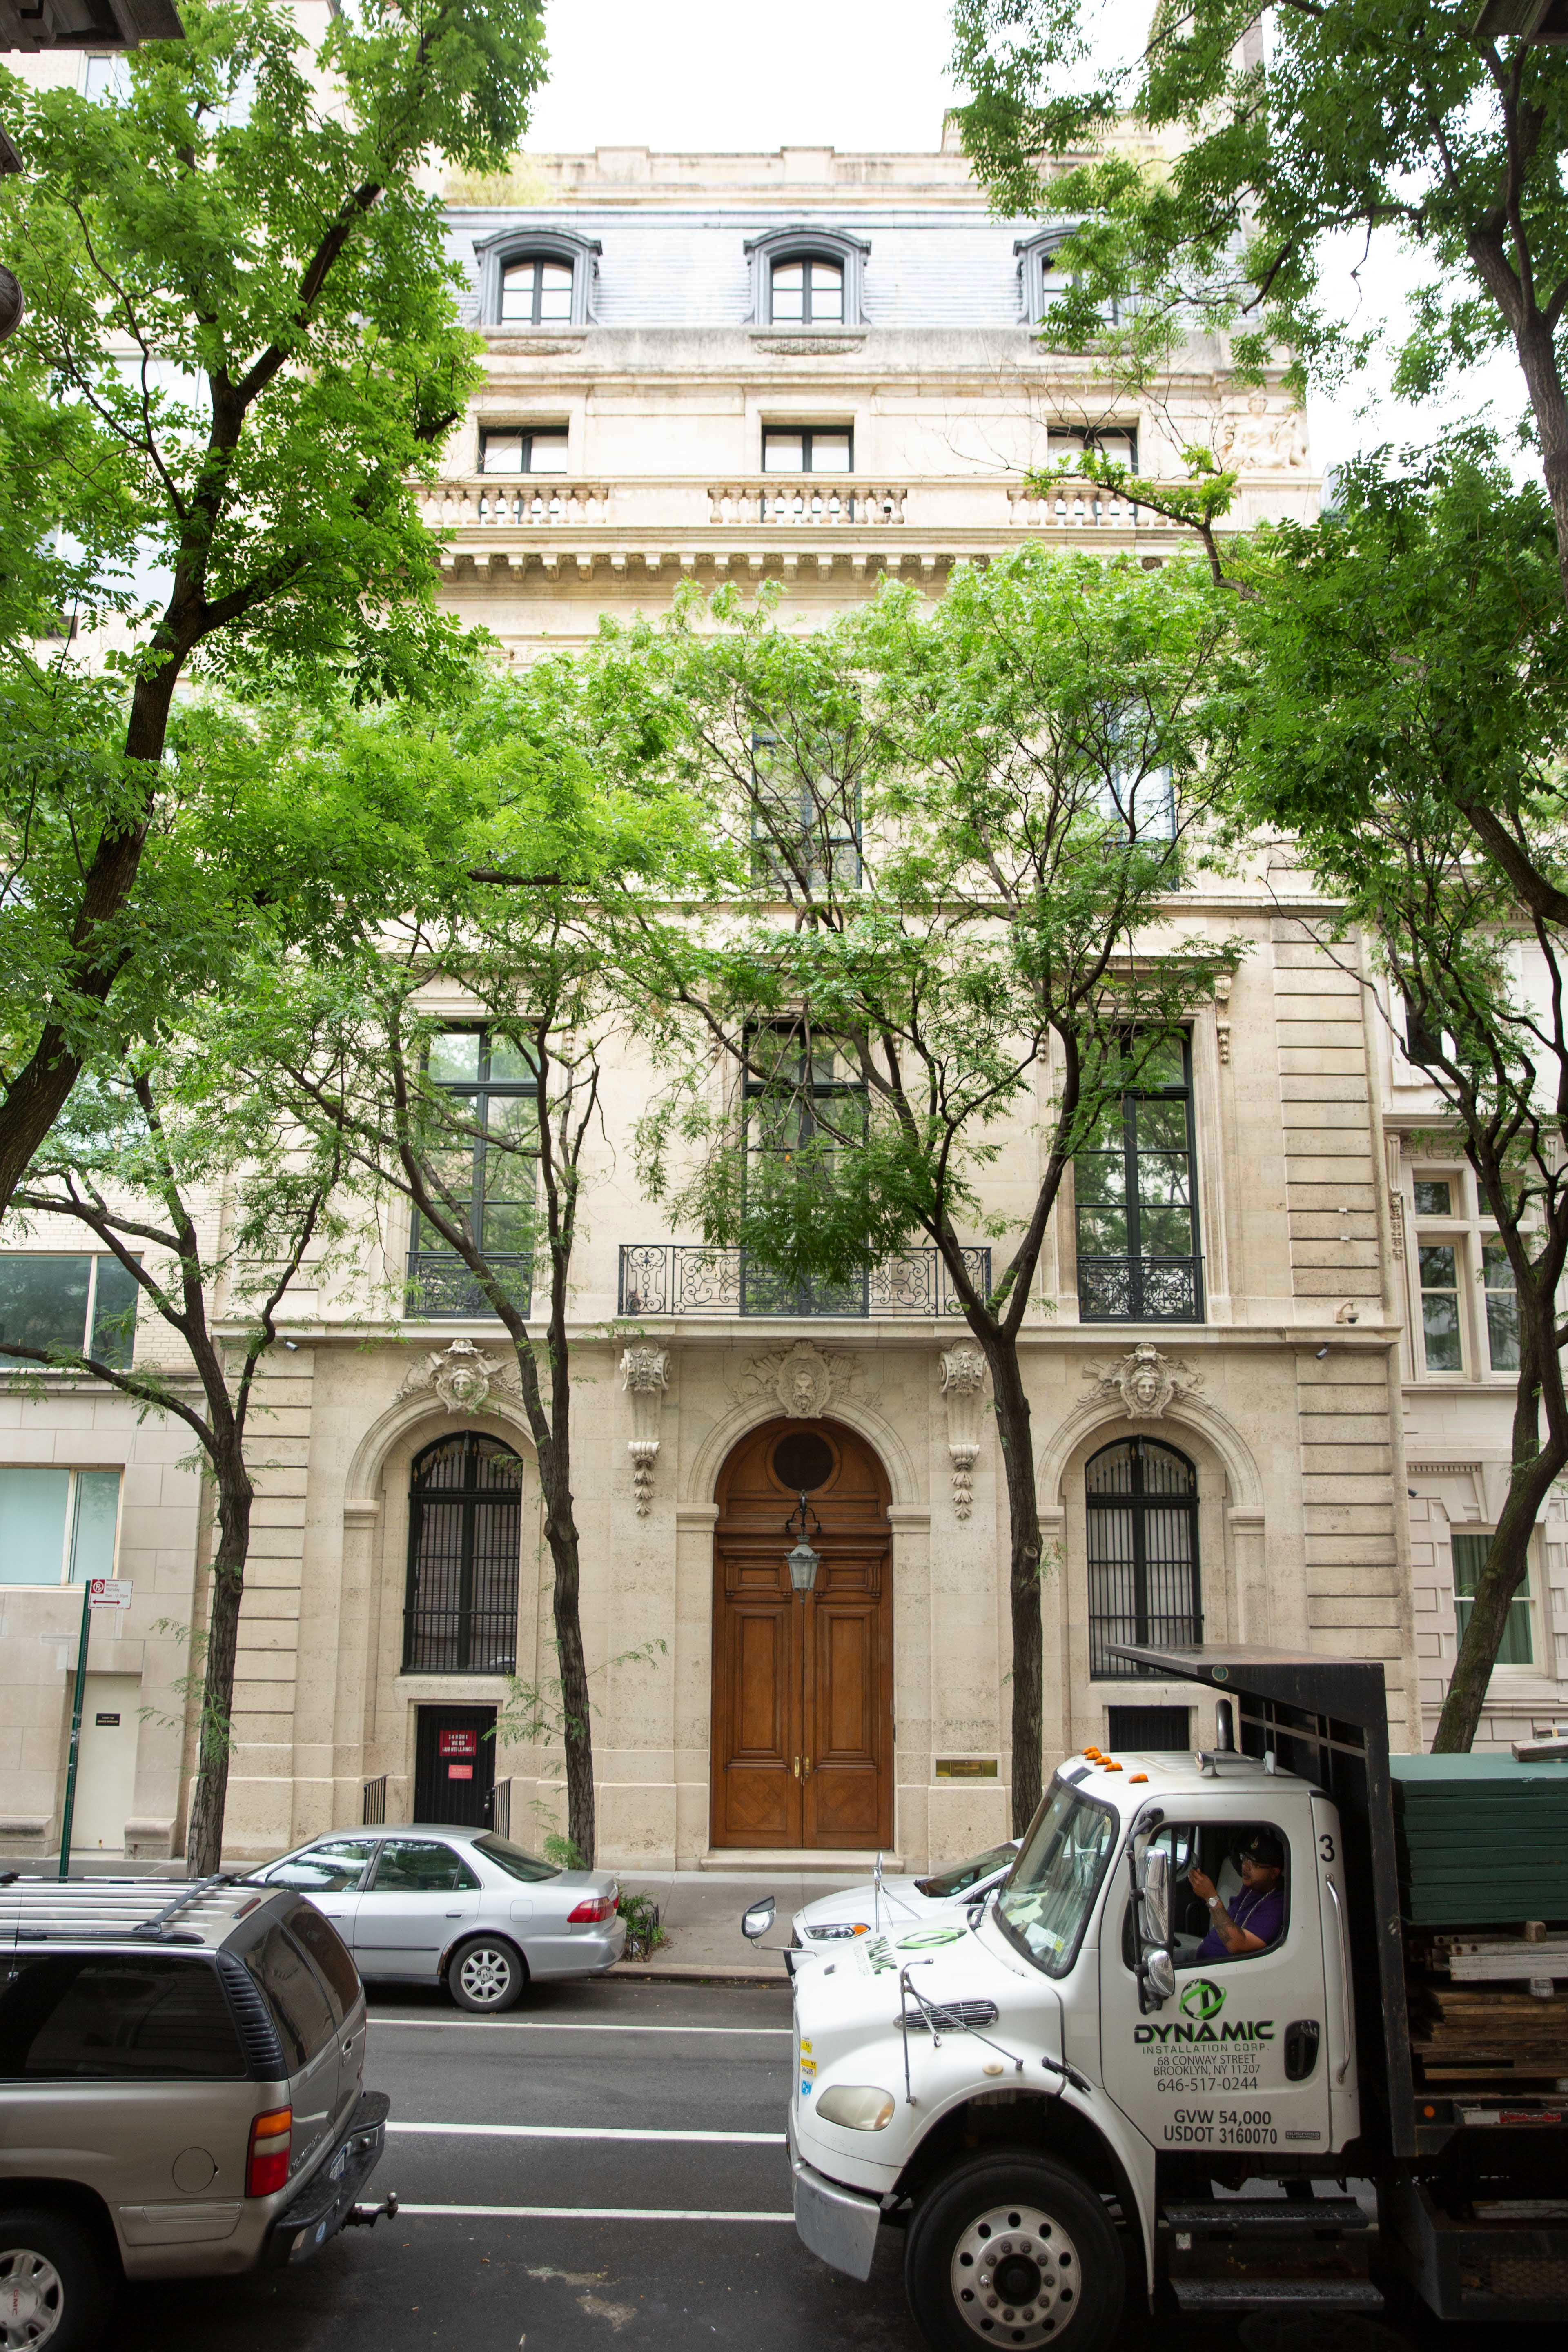 NEW YORK, NY - JULY 08: A residence belonging to Jeffrey Epstein at East 71st street is seen on the Upper East Side of Manhattan on July 8, 2019 in New York City. According to reports, Epstein is charged with running a sex-trafficking operation out of his opulent mansion. (Photo by Kevin Hagen/Getty Images)